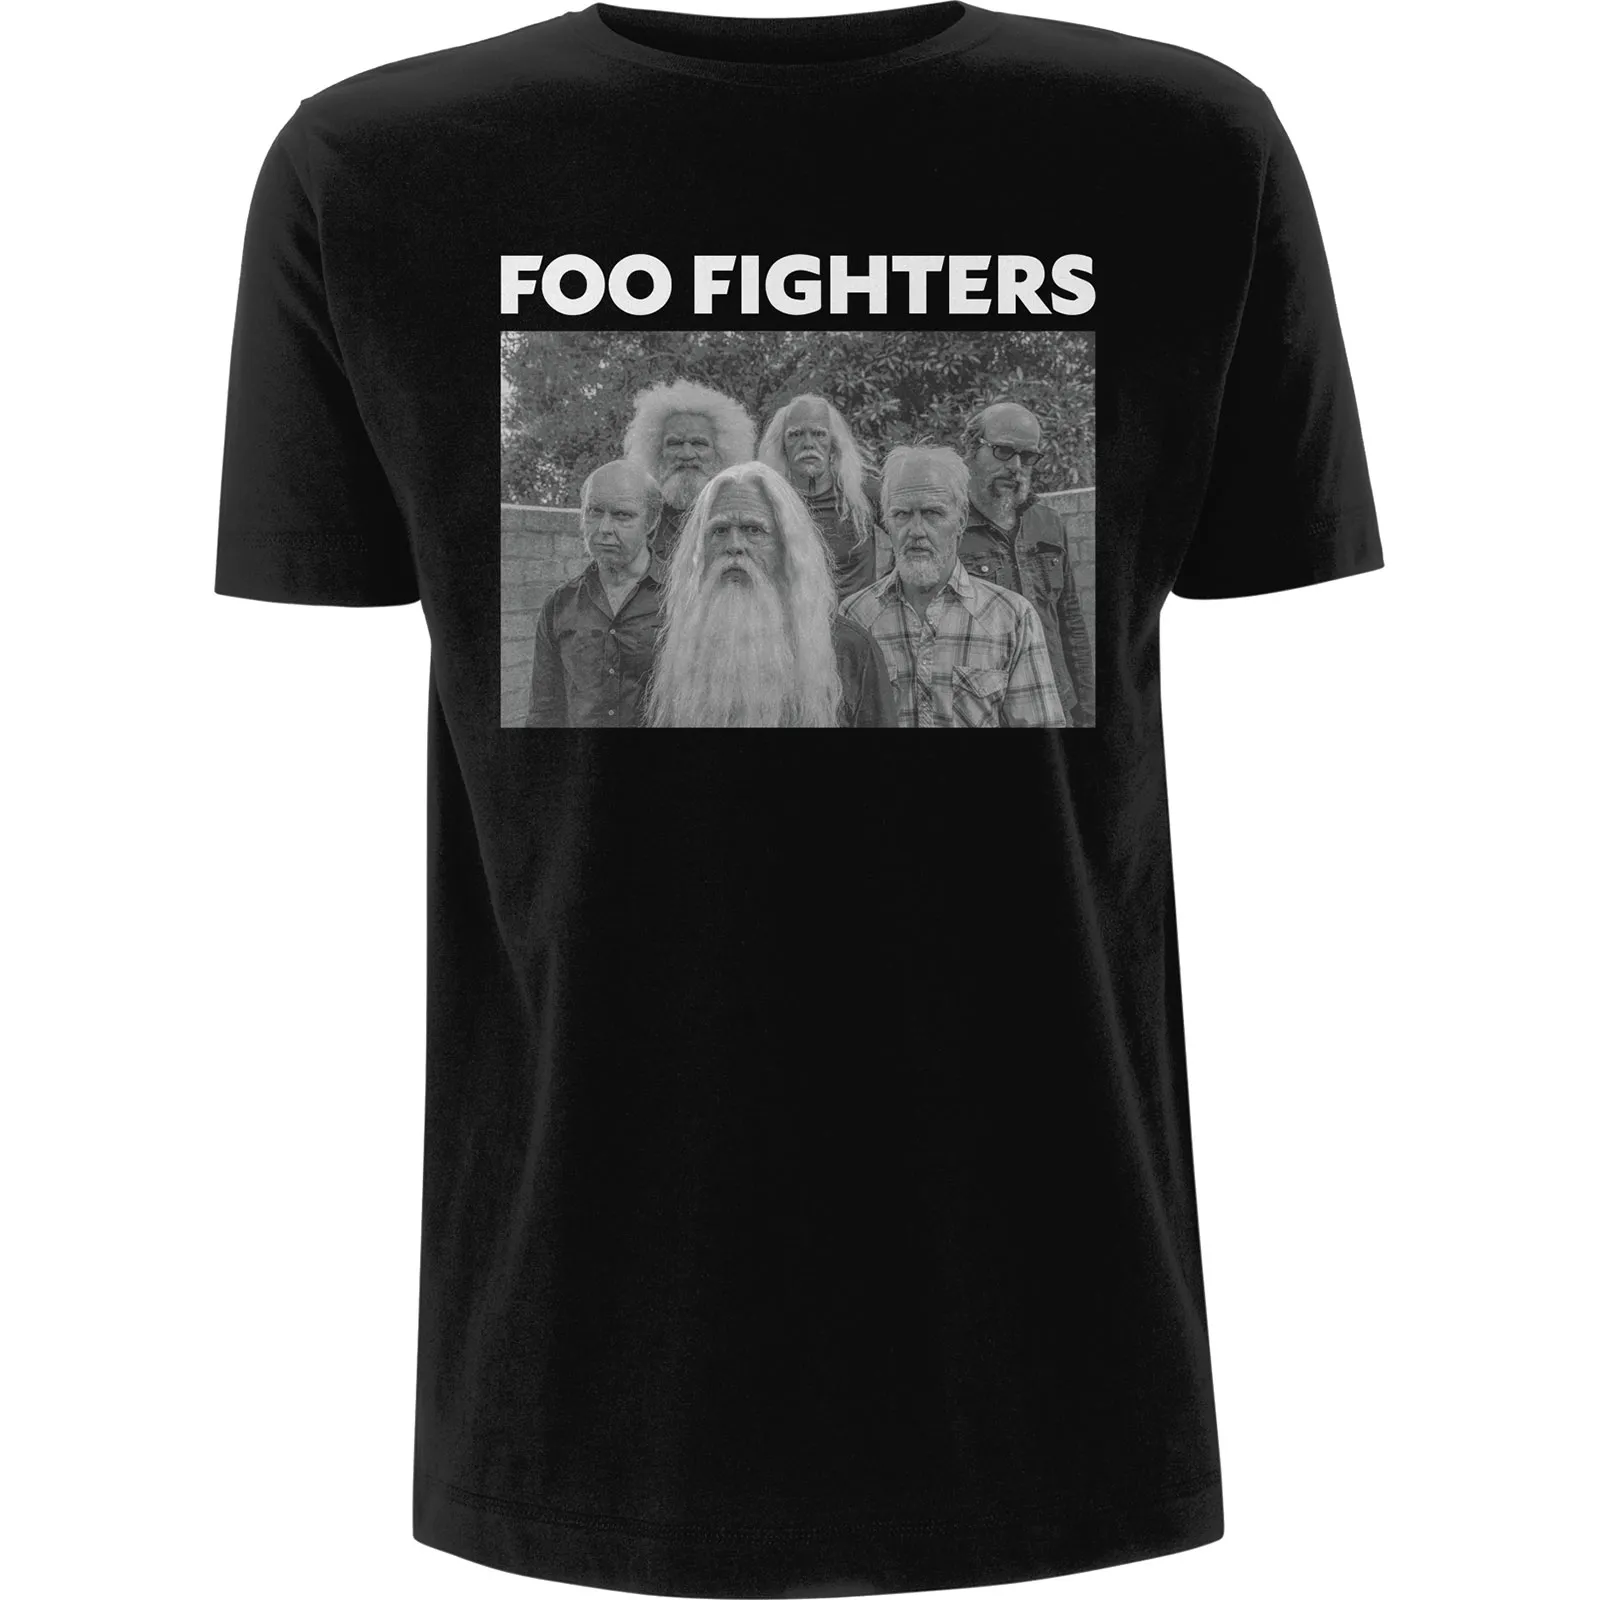 Foo Fighters - Unisex T-Shirt Old Band Photo artwork